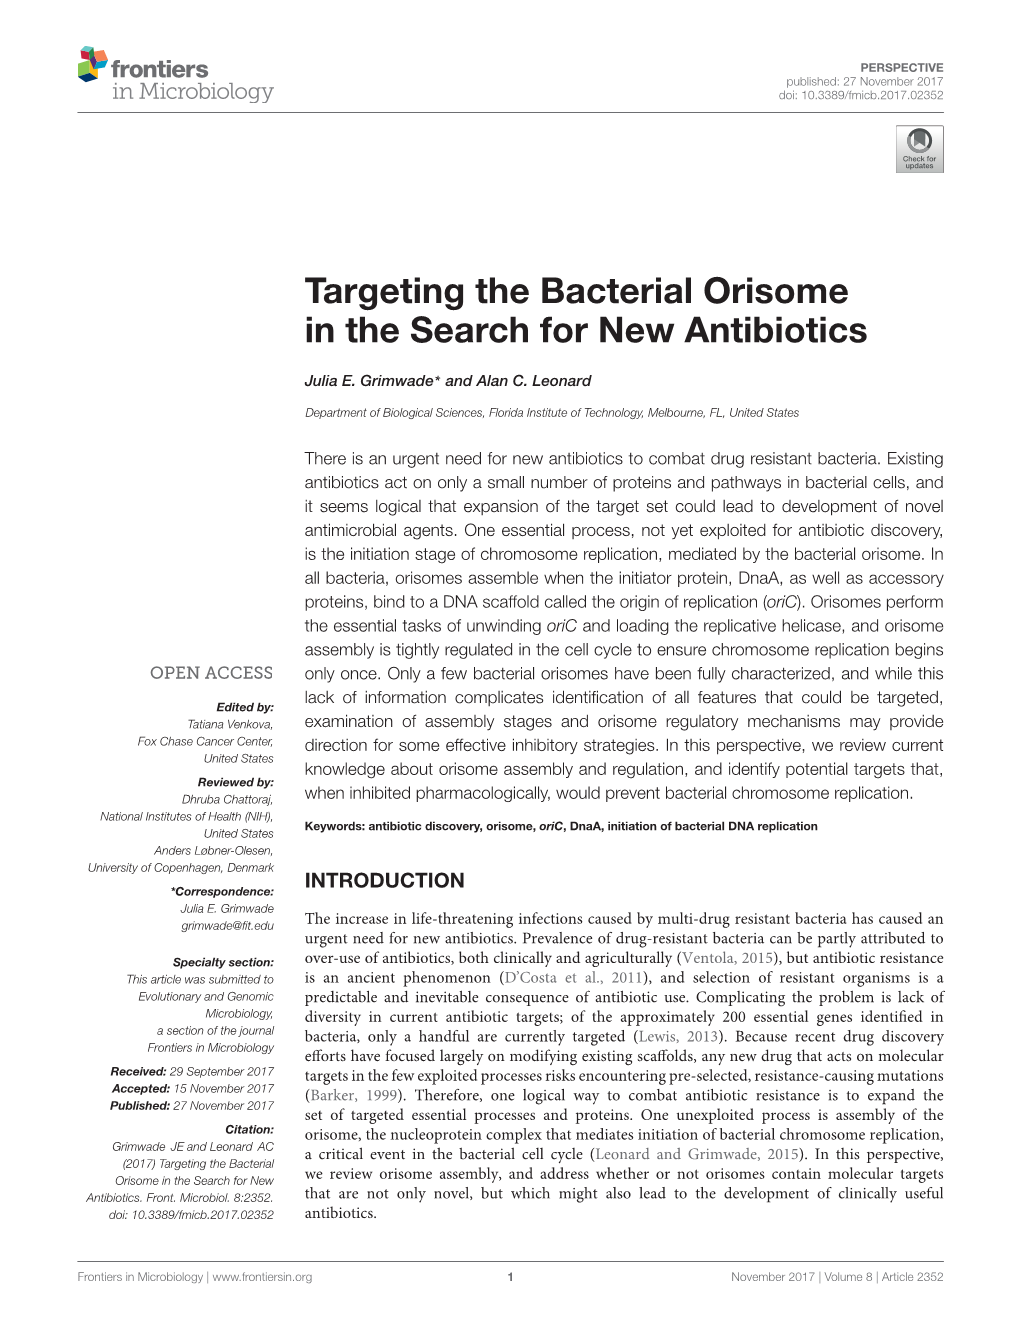 Targeting the Bacterial Orisome in the Search for New Antibiotics